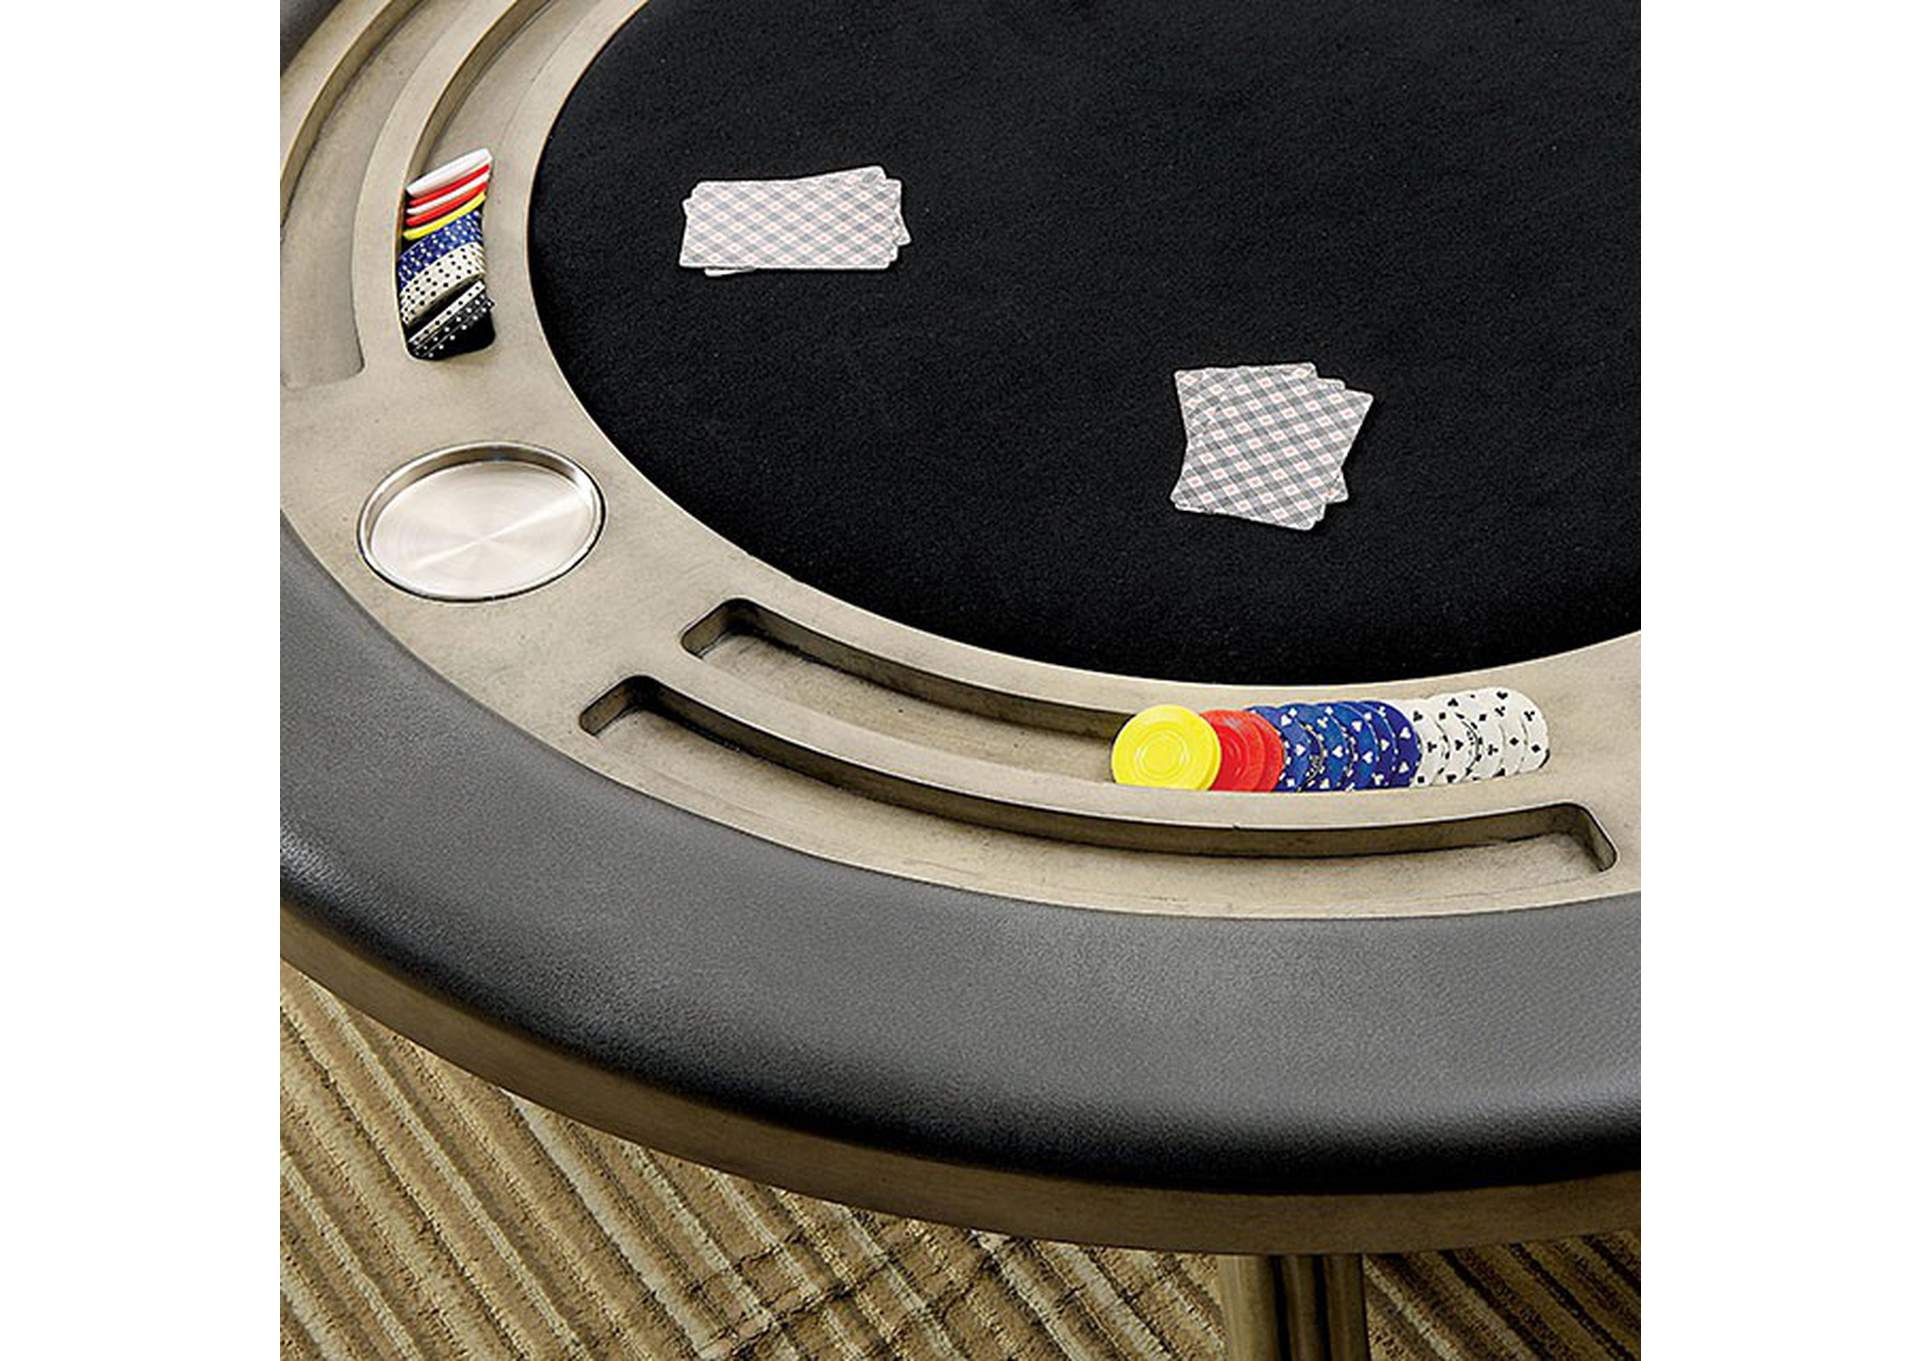 Melina Game Table,Furniture of America